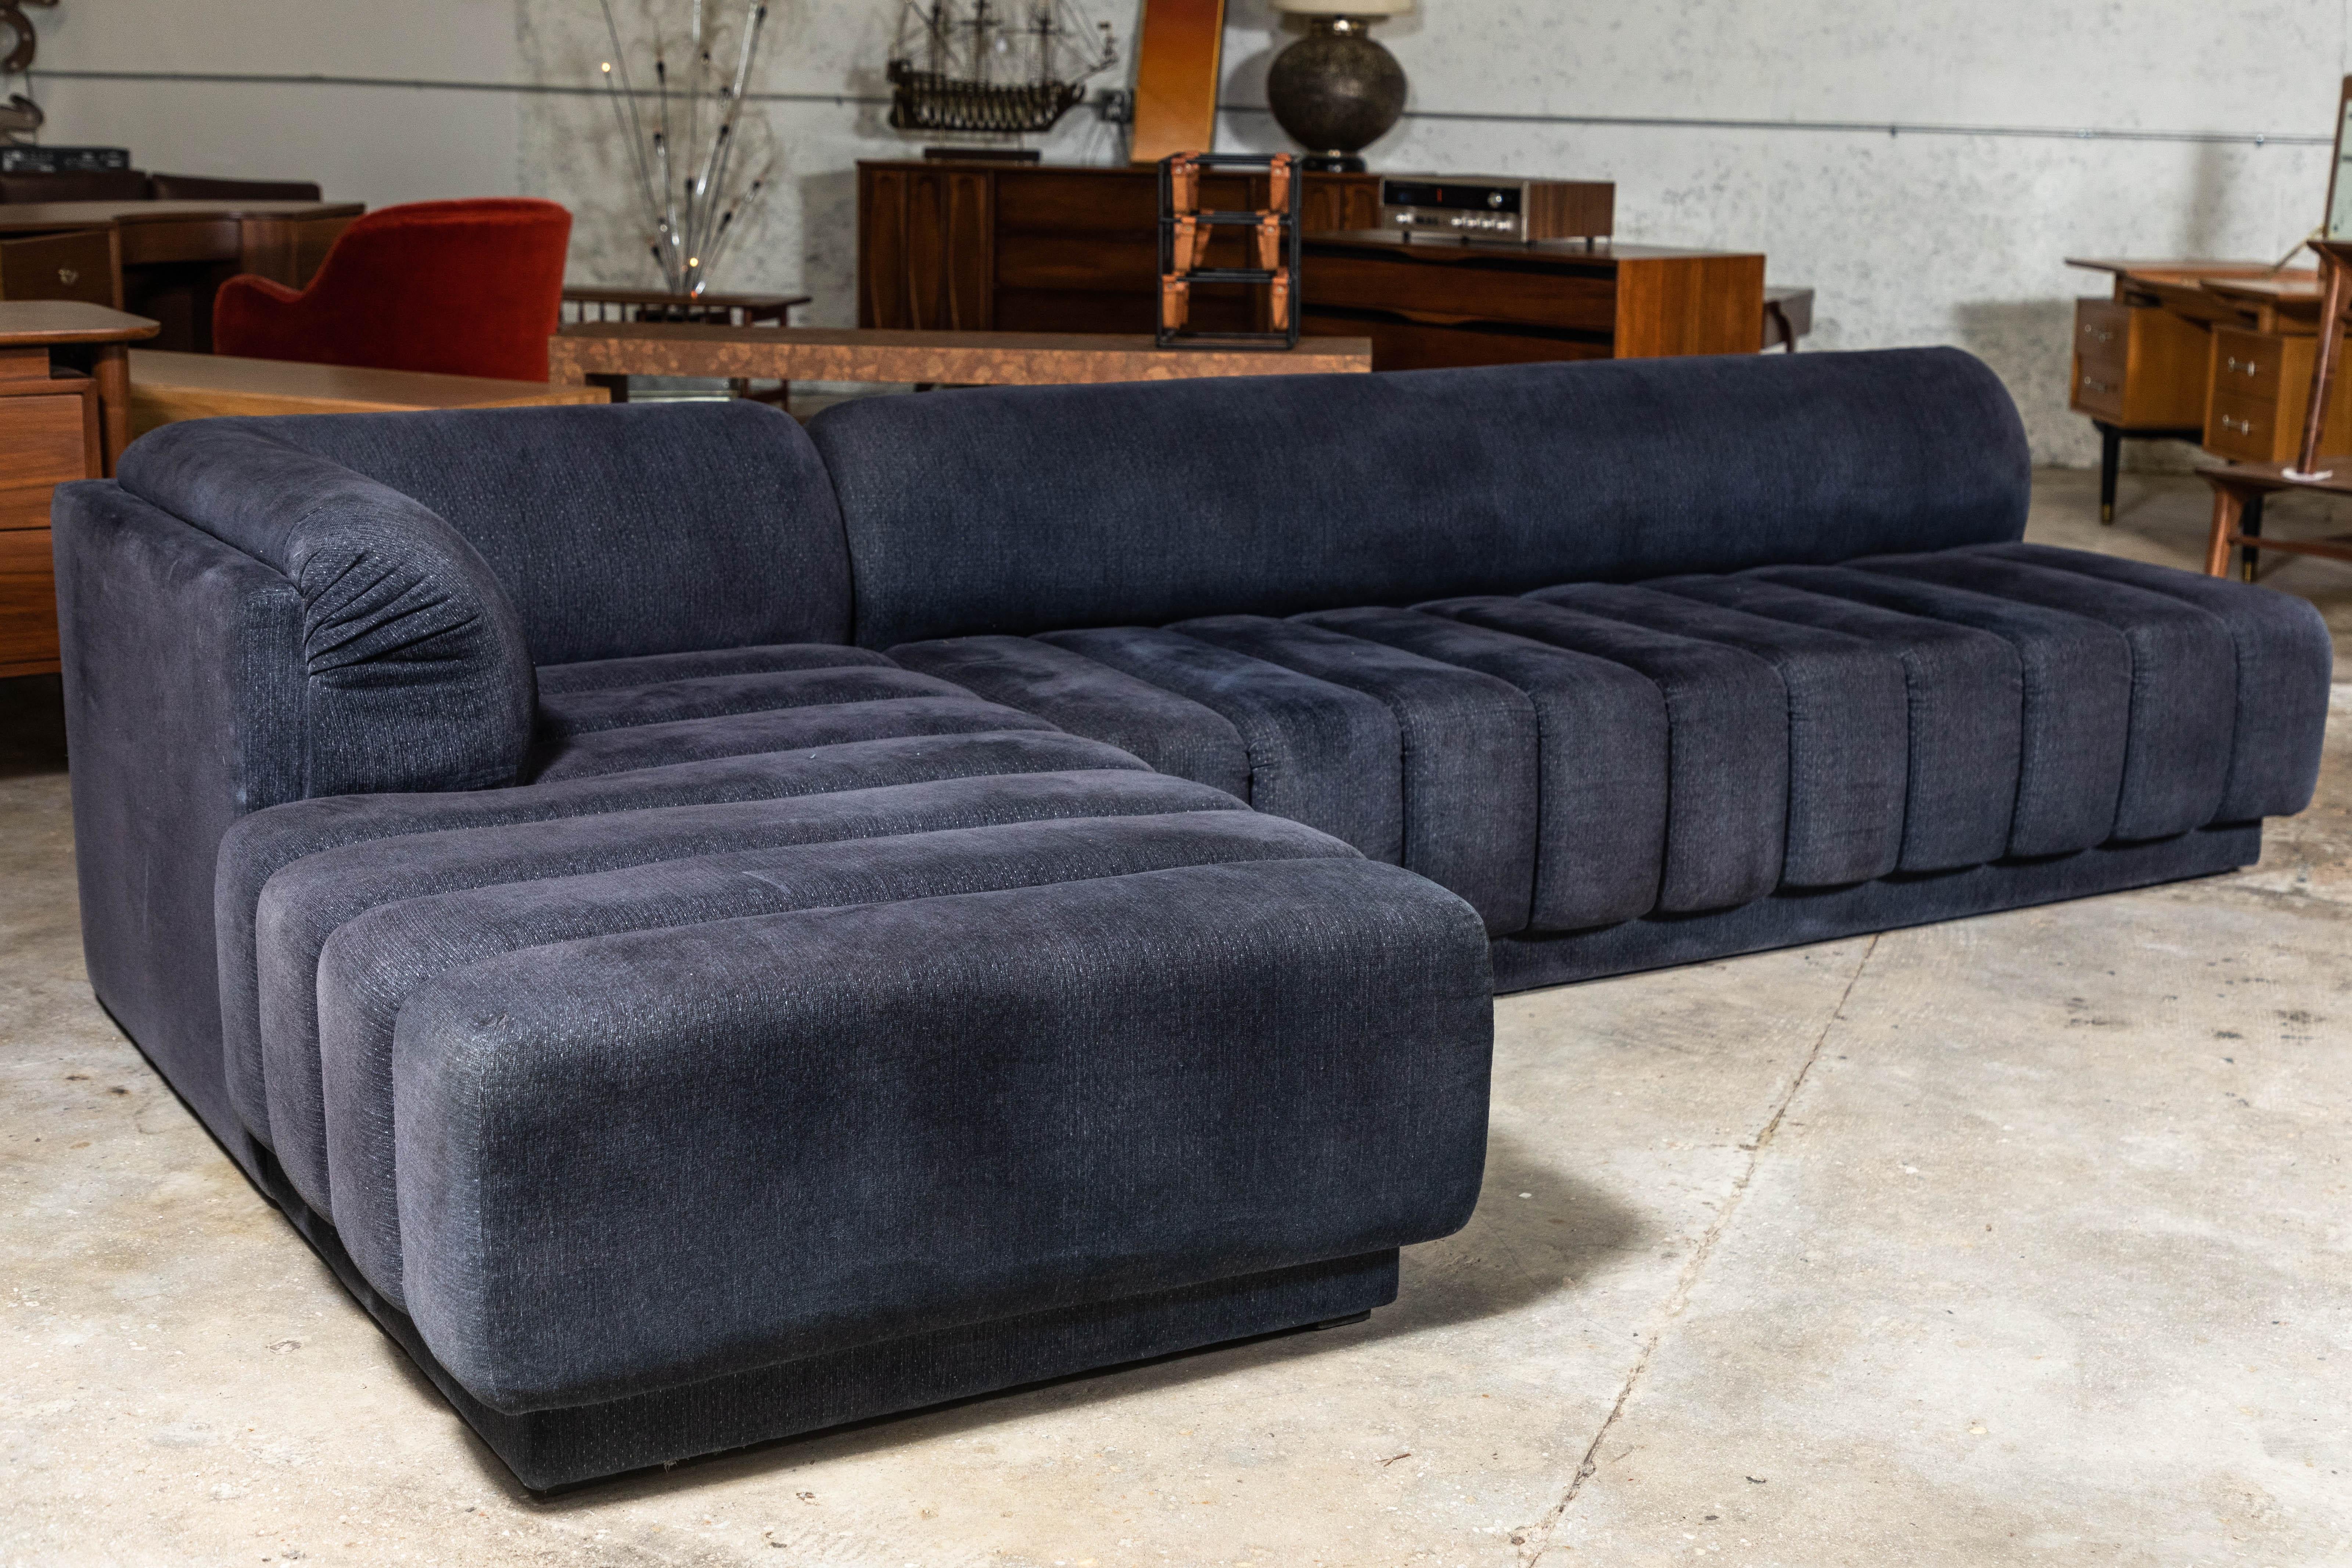 Rare and Amazing Designer Sectional Sofa by Directional, Dated 1987 For Sale 3